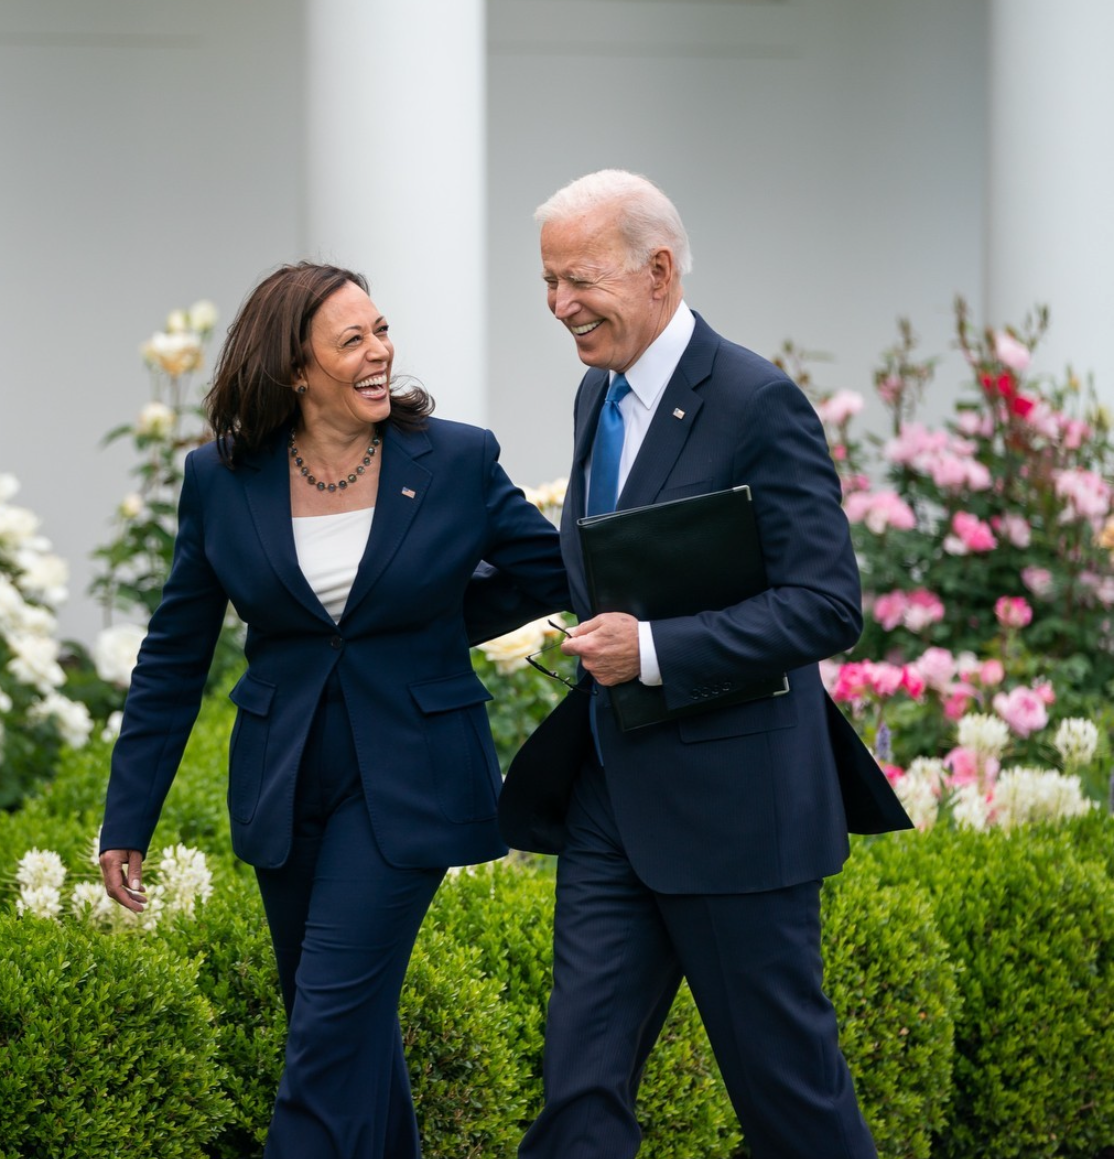 Analysts weigh in on Biden dropping out of White House race.